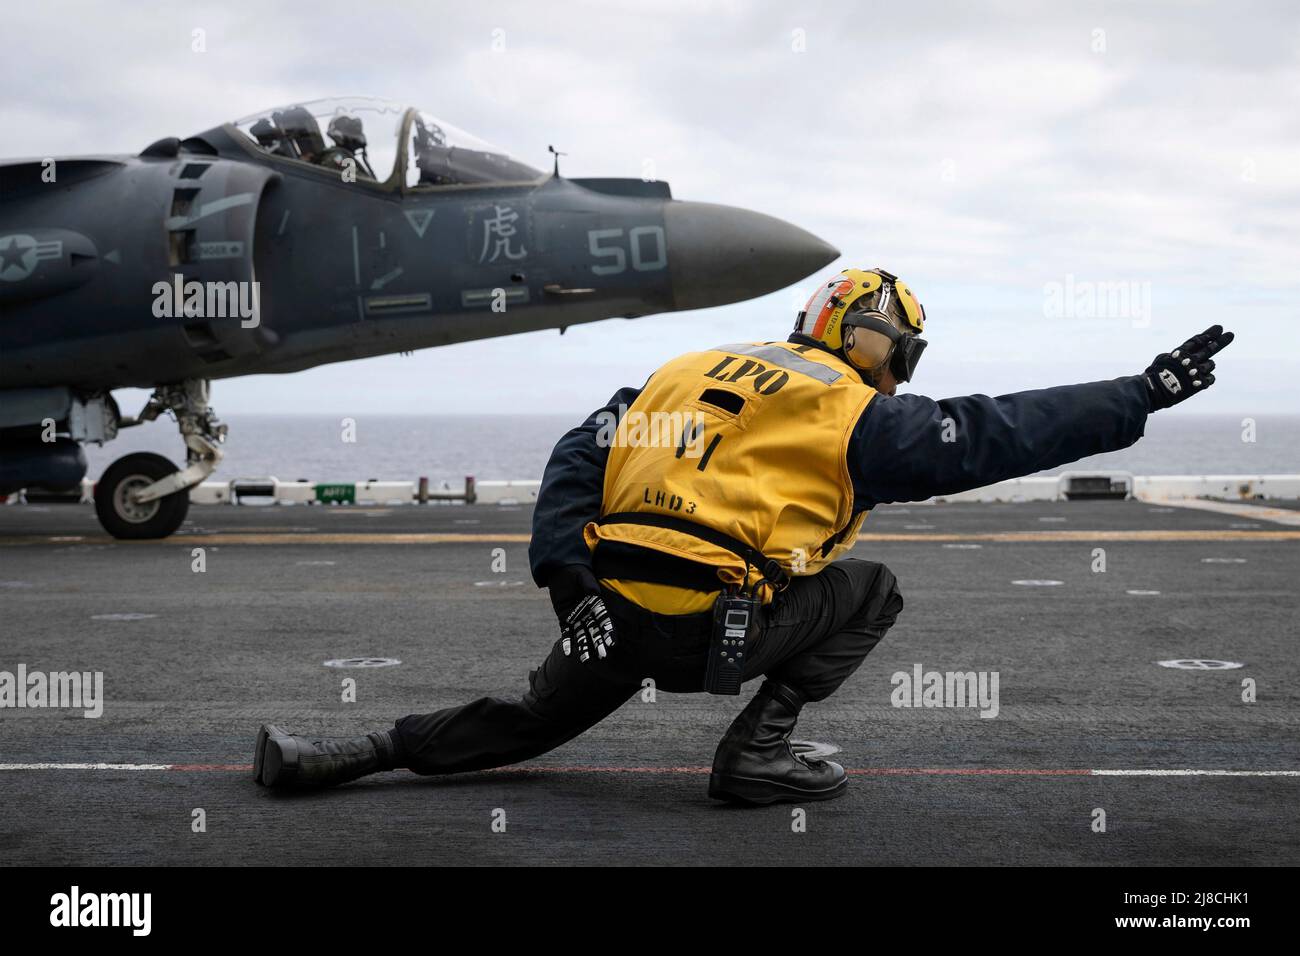 U.S. Navy Aviation Boatswains Mate 1st Class Reymond Rallos signals a Marine Corps AV-8B Harrier attached to the 22nd Marine Expeditionary Unit, to launch from the flight deck of the Wasp-class amphibious assault ship USS Kearsarge, April 20, 2022 on the Atlantic Ocean. Stock Photo